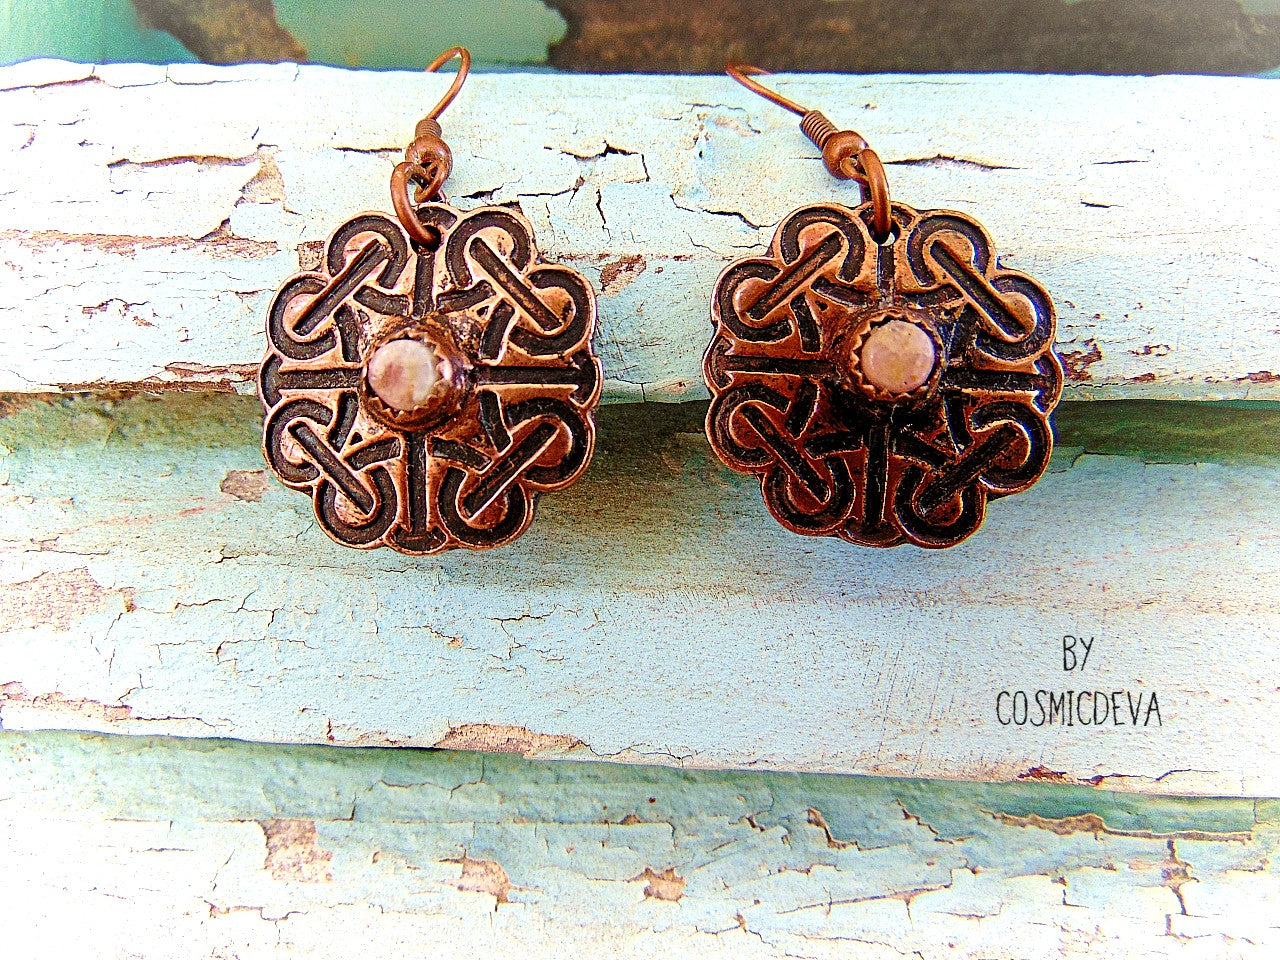 Handcrafted solid copper Celtic knot earrings featuring white natural tourmaline gemstones in the center. The Celtic knot is a significant symbol that is also referred to as the mystic or endless knot, and the symbolism behind it involves beginnings and endings